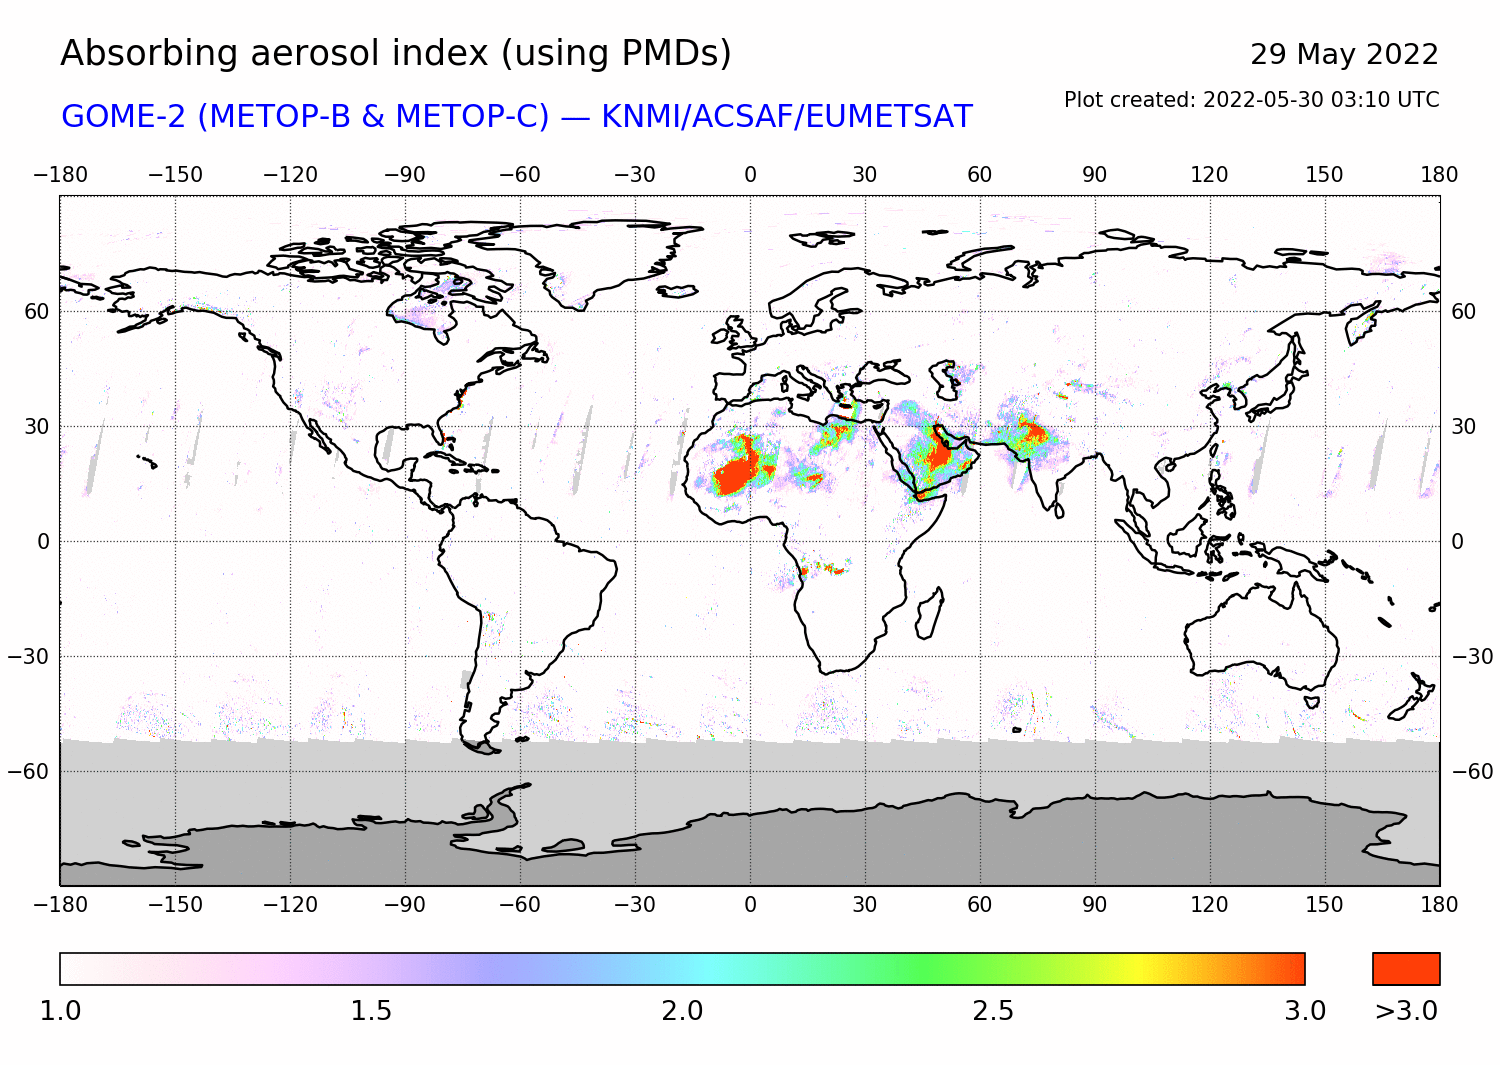 GOME-2 - Absorbing aerosol index of 29 May 2022